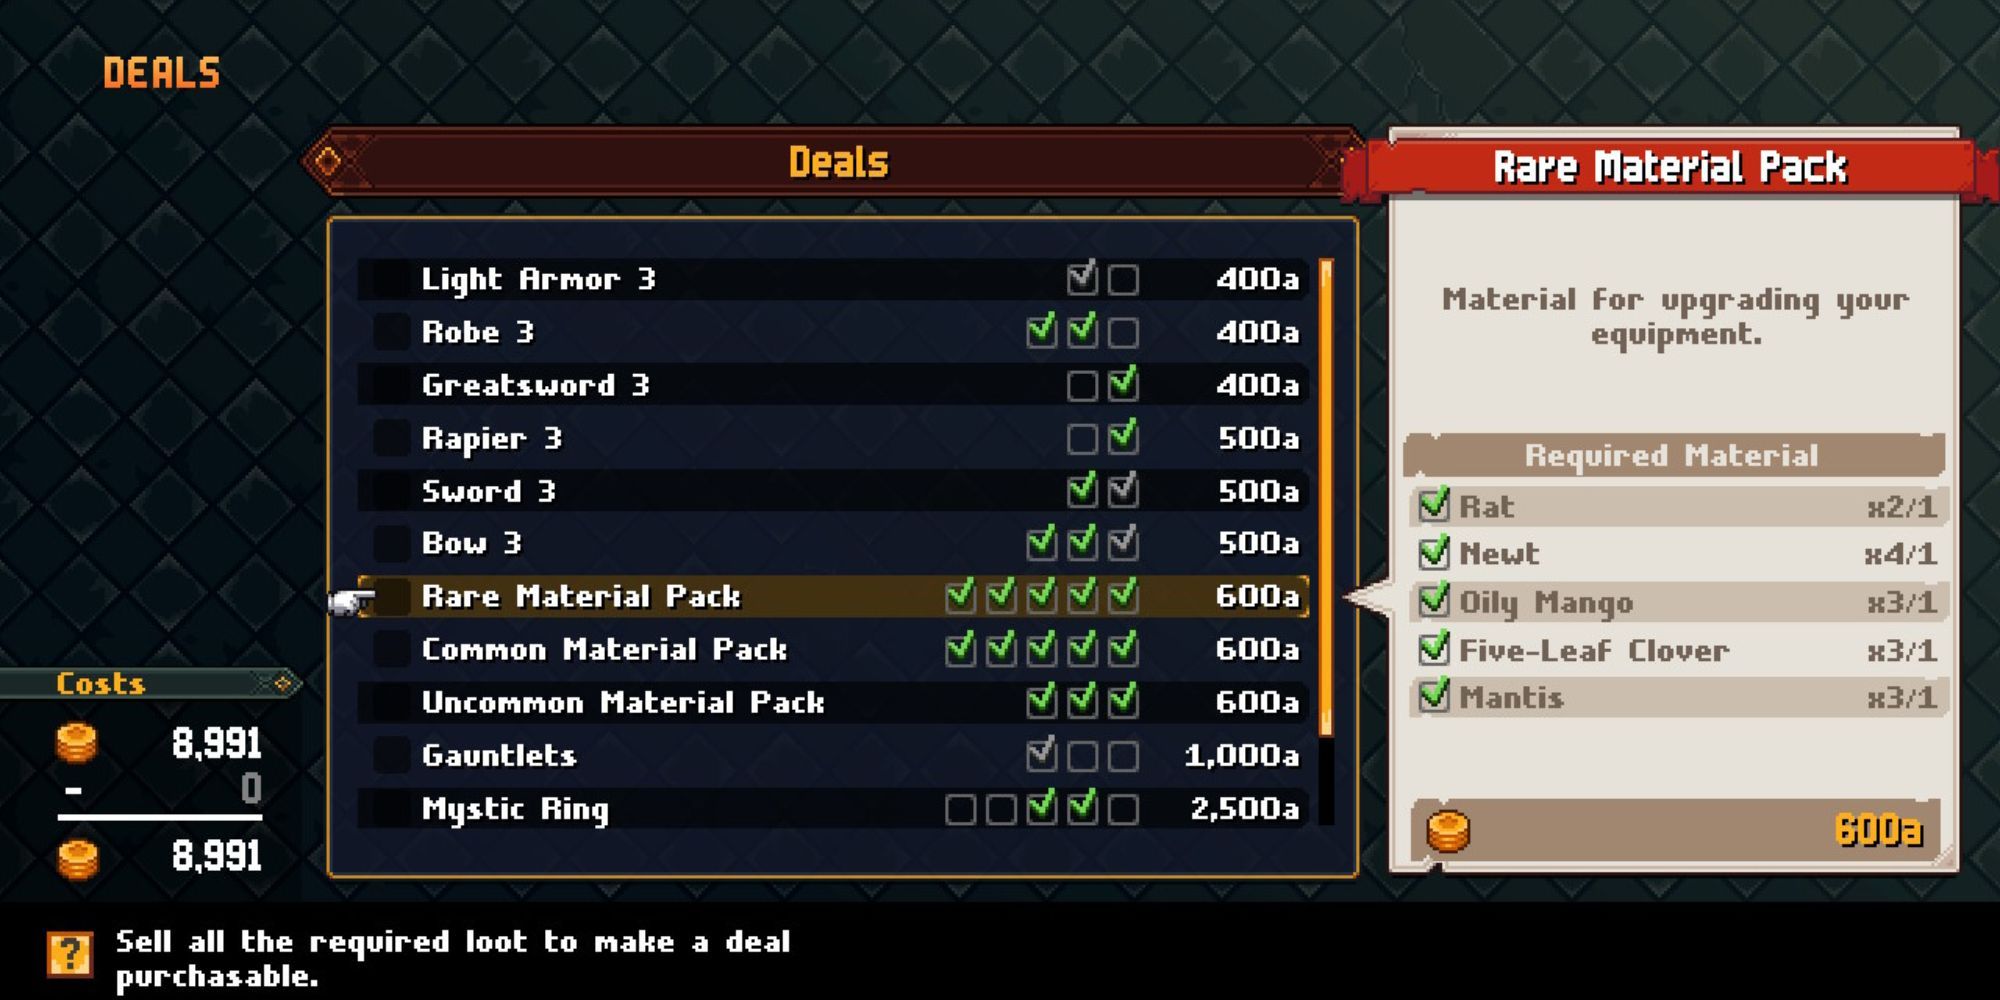 Chained Echoes Deals menu showing items available